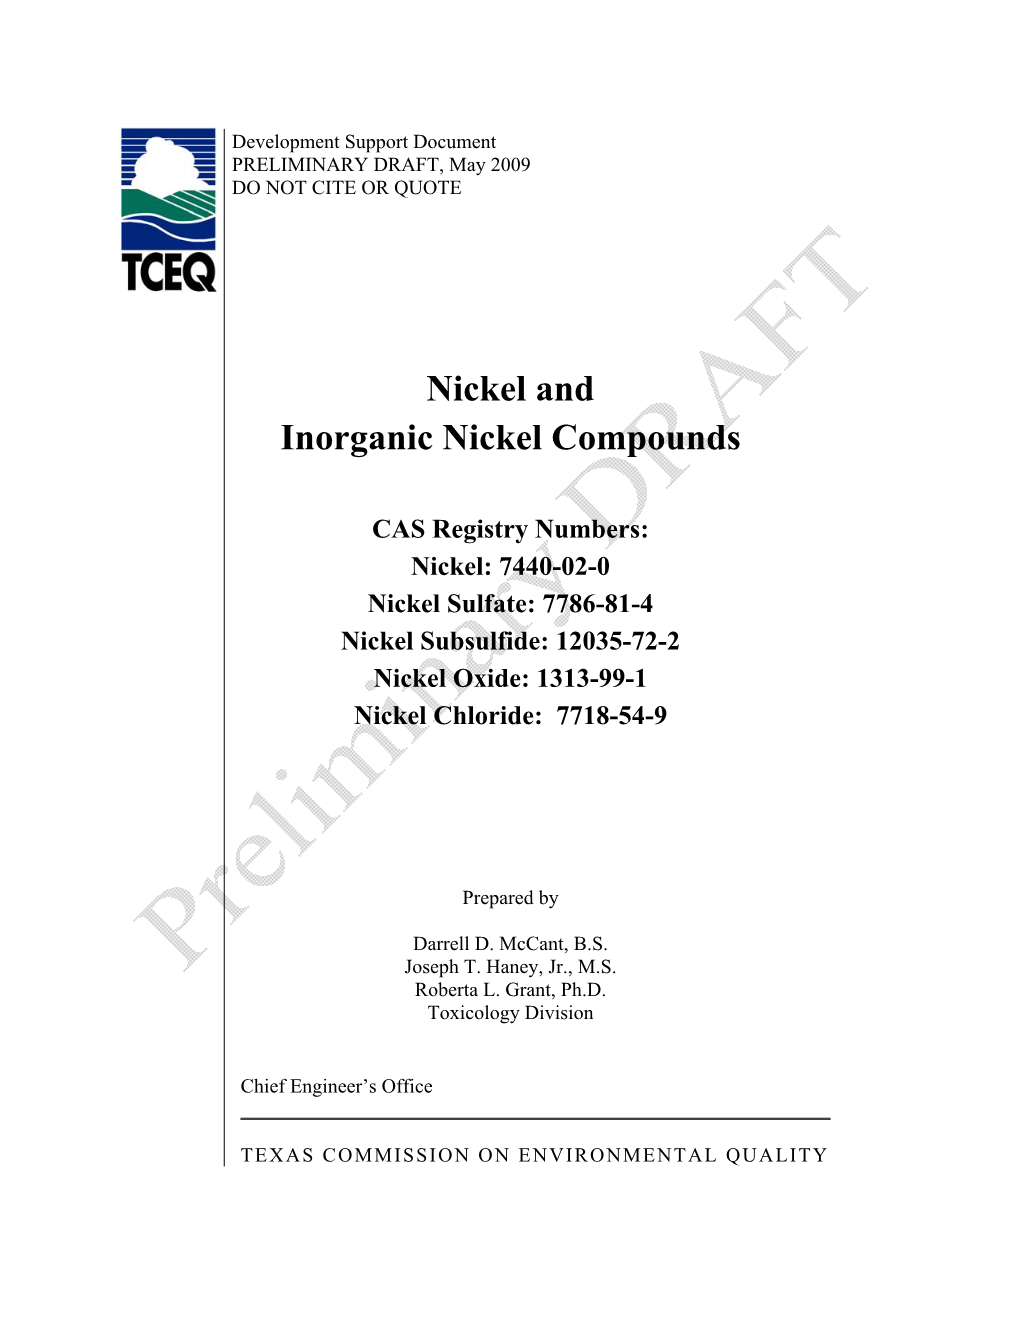 Nickel and Inorganic Nickel Compounds